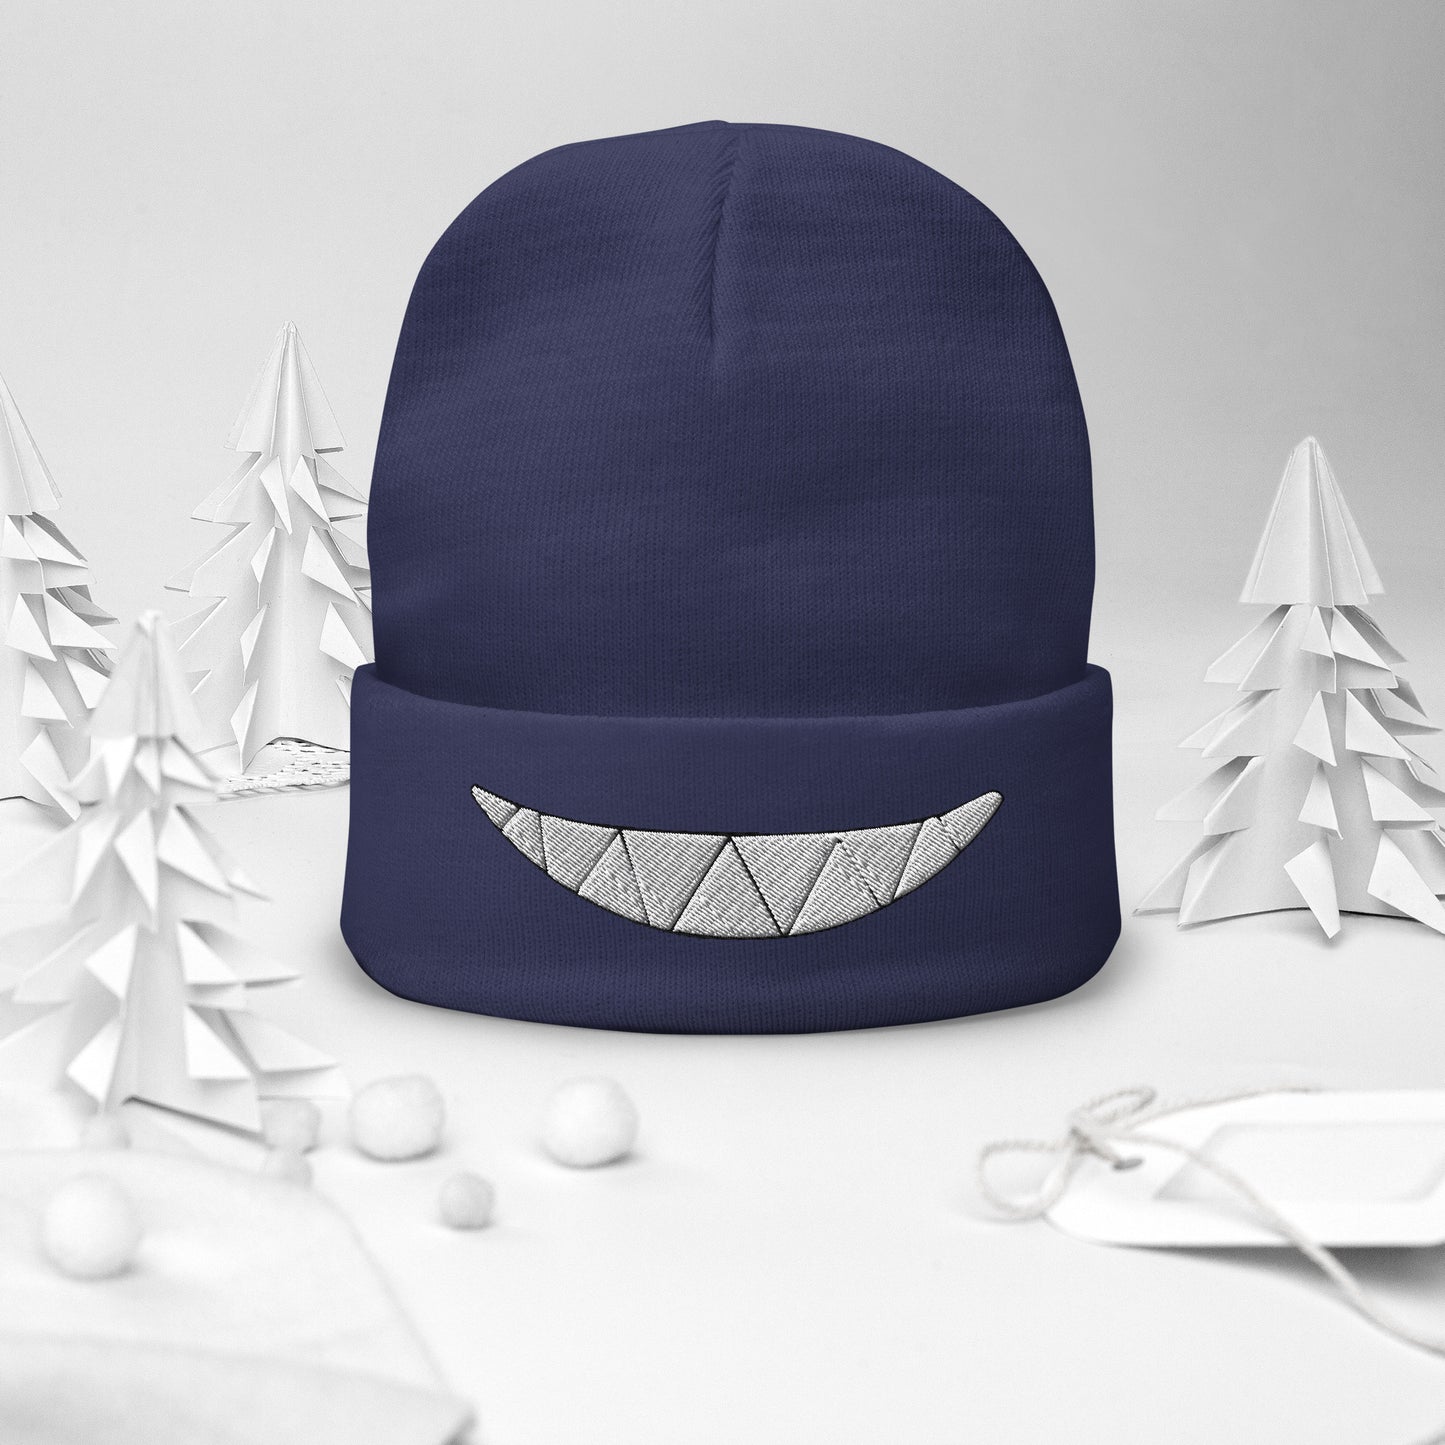 Shinra's Smile Embroidered Beanie